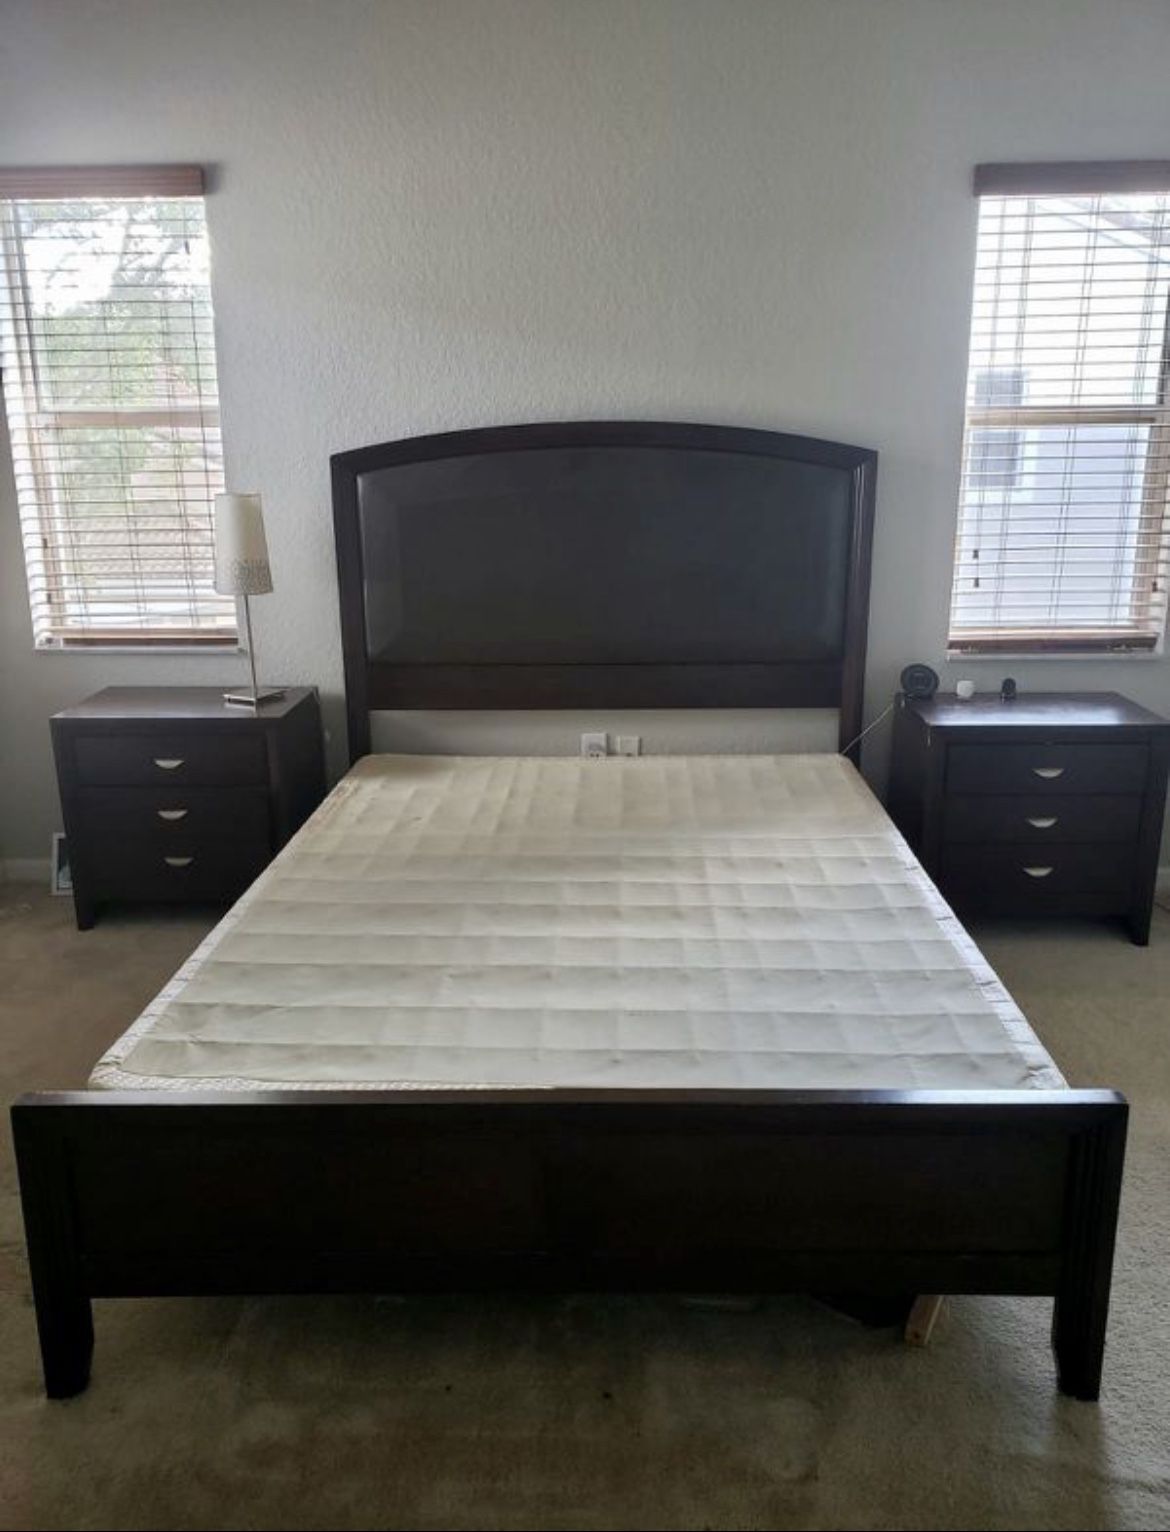 Queen bed frame and tall dresser drawer